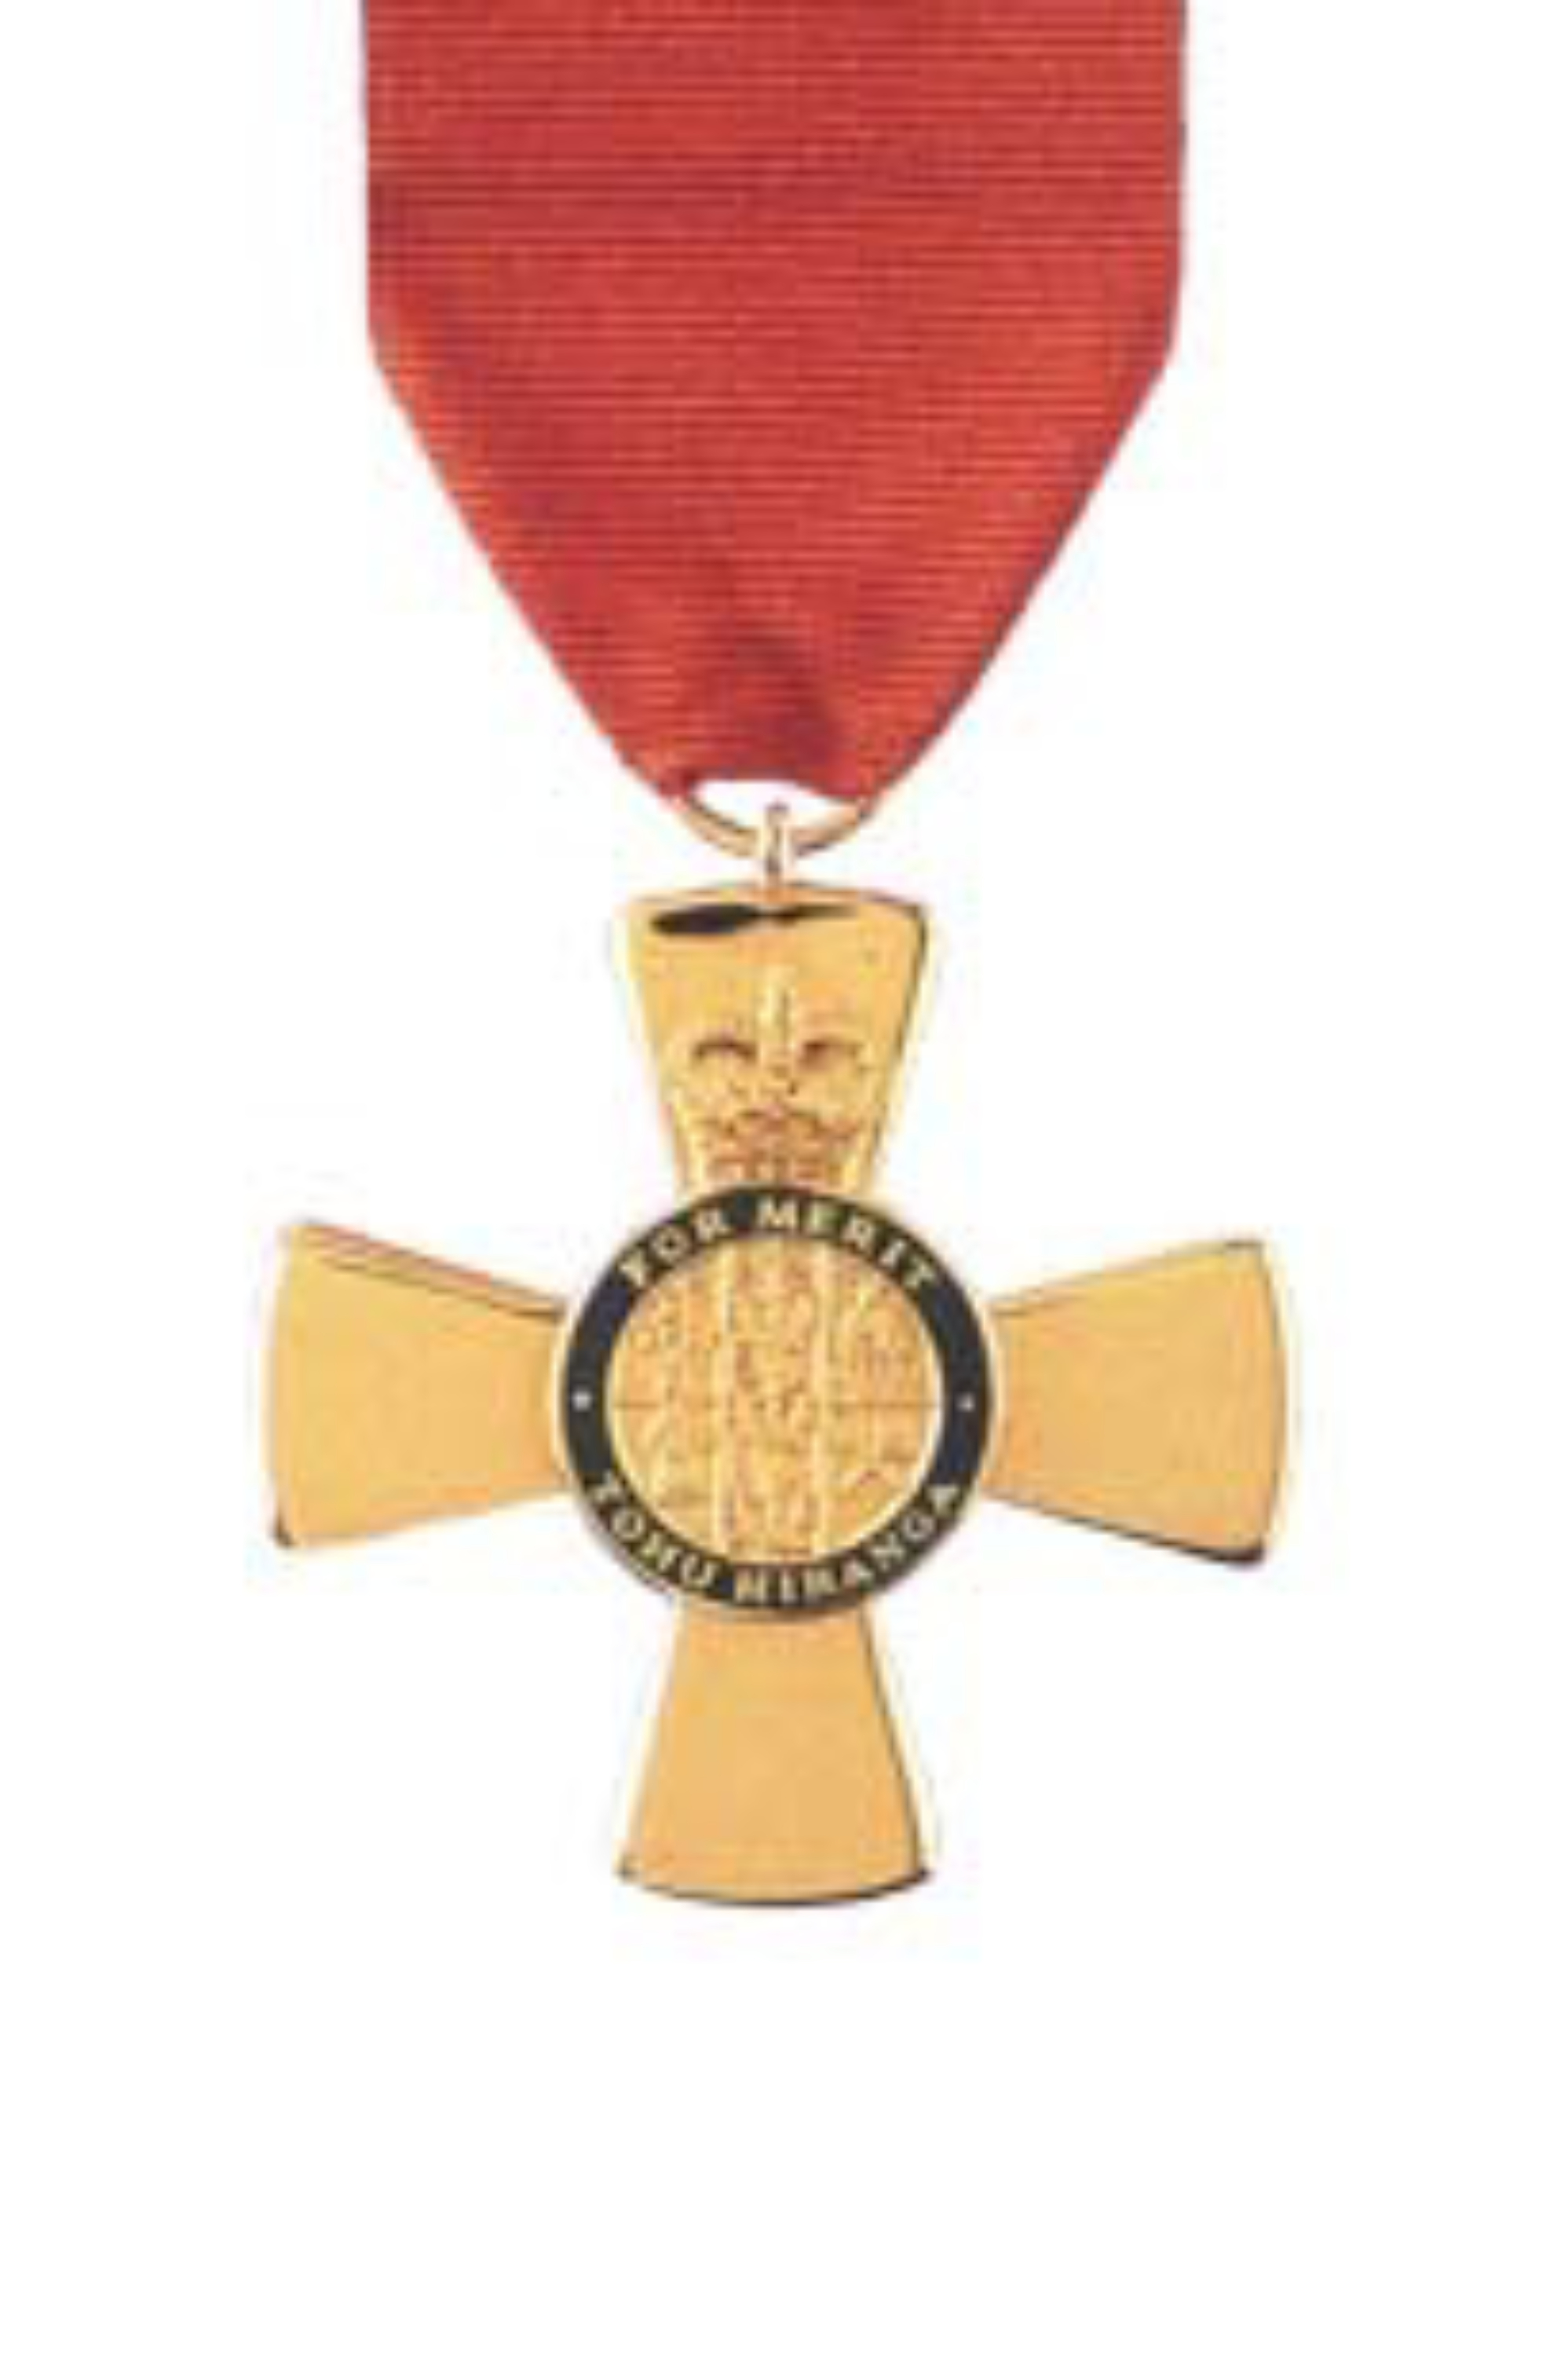 New Zealand Order of Merit for Sports